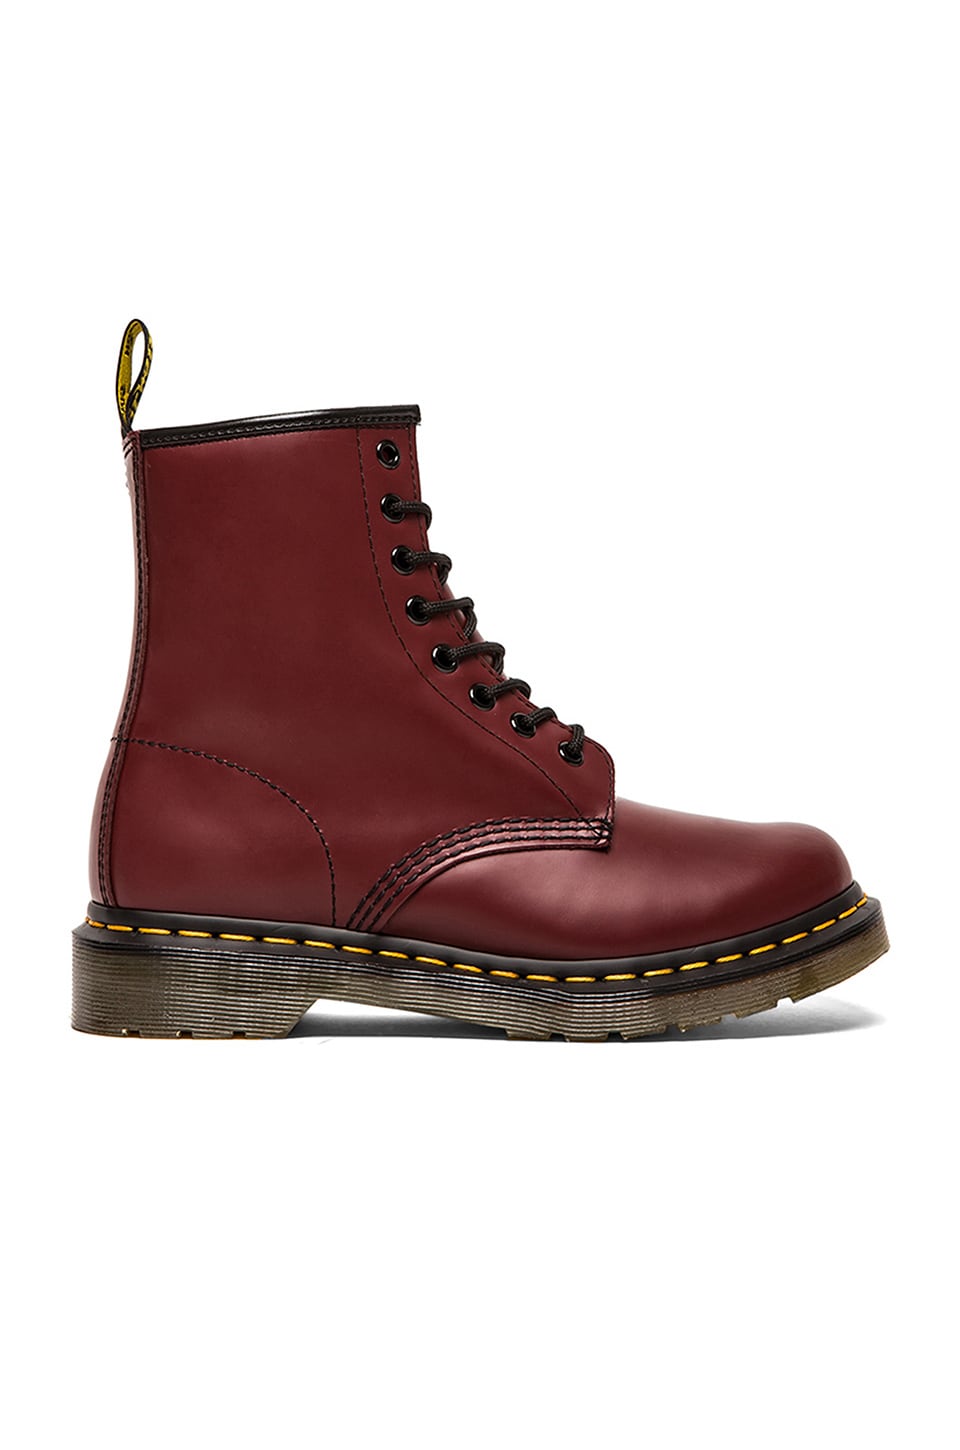 Dr. Martens Iconic 8 Eye Boot in Cherry Red | REVOLVE